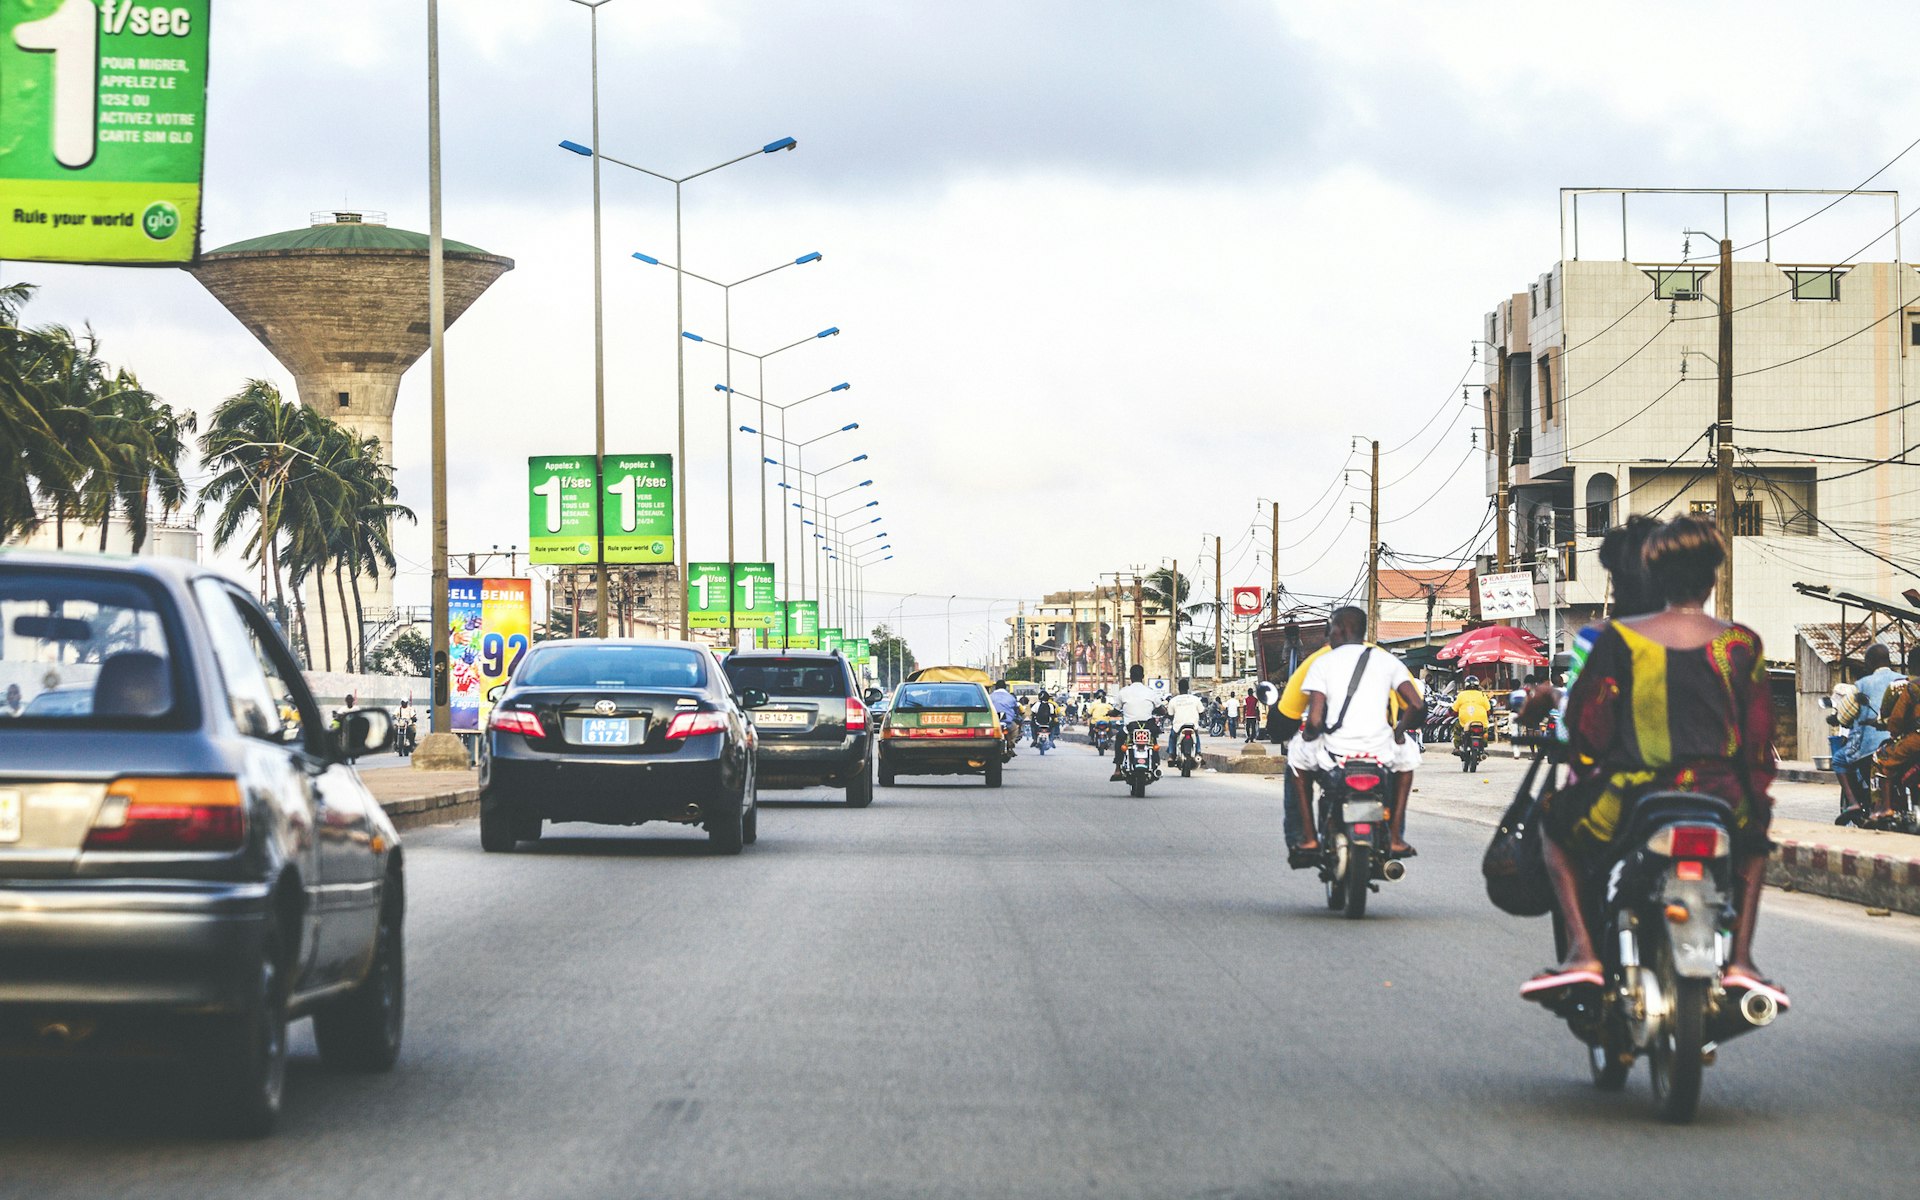 Busy traffic in the streets of Cotonou, Benin.